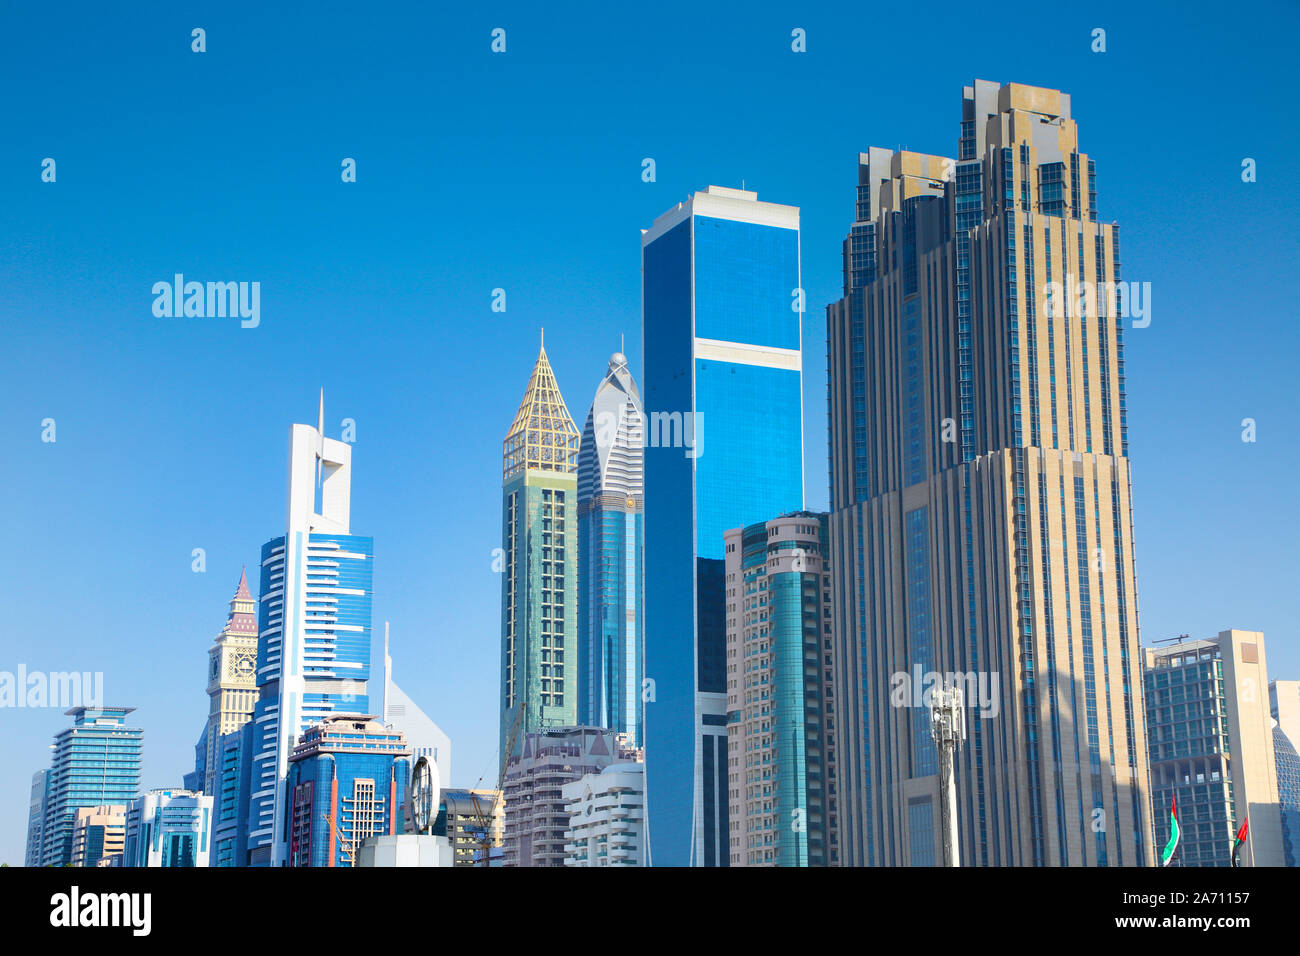 Skyscrappers of office buildings & hotels on the skyline of Dubai, United Arab Emirates. Stock Photo